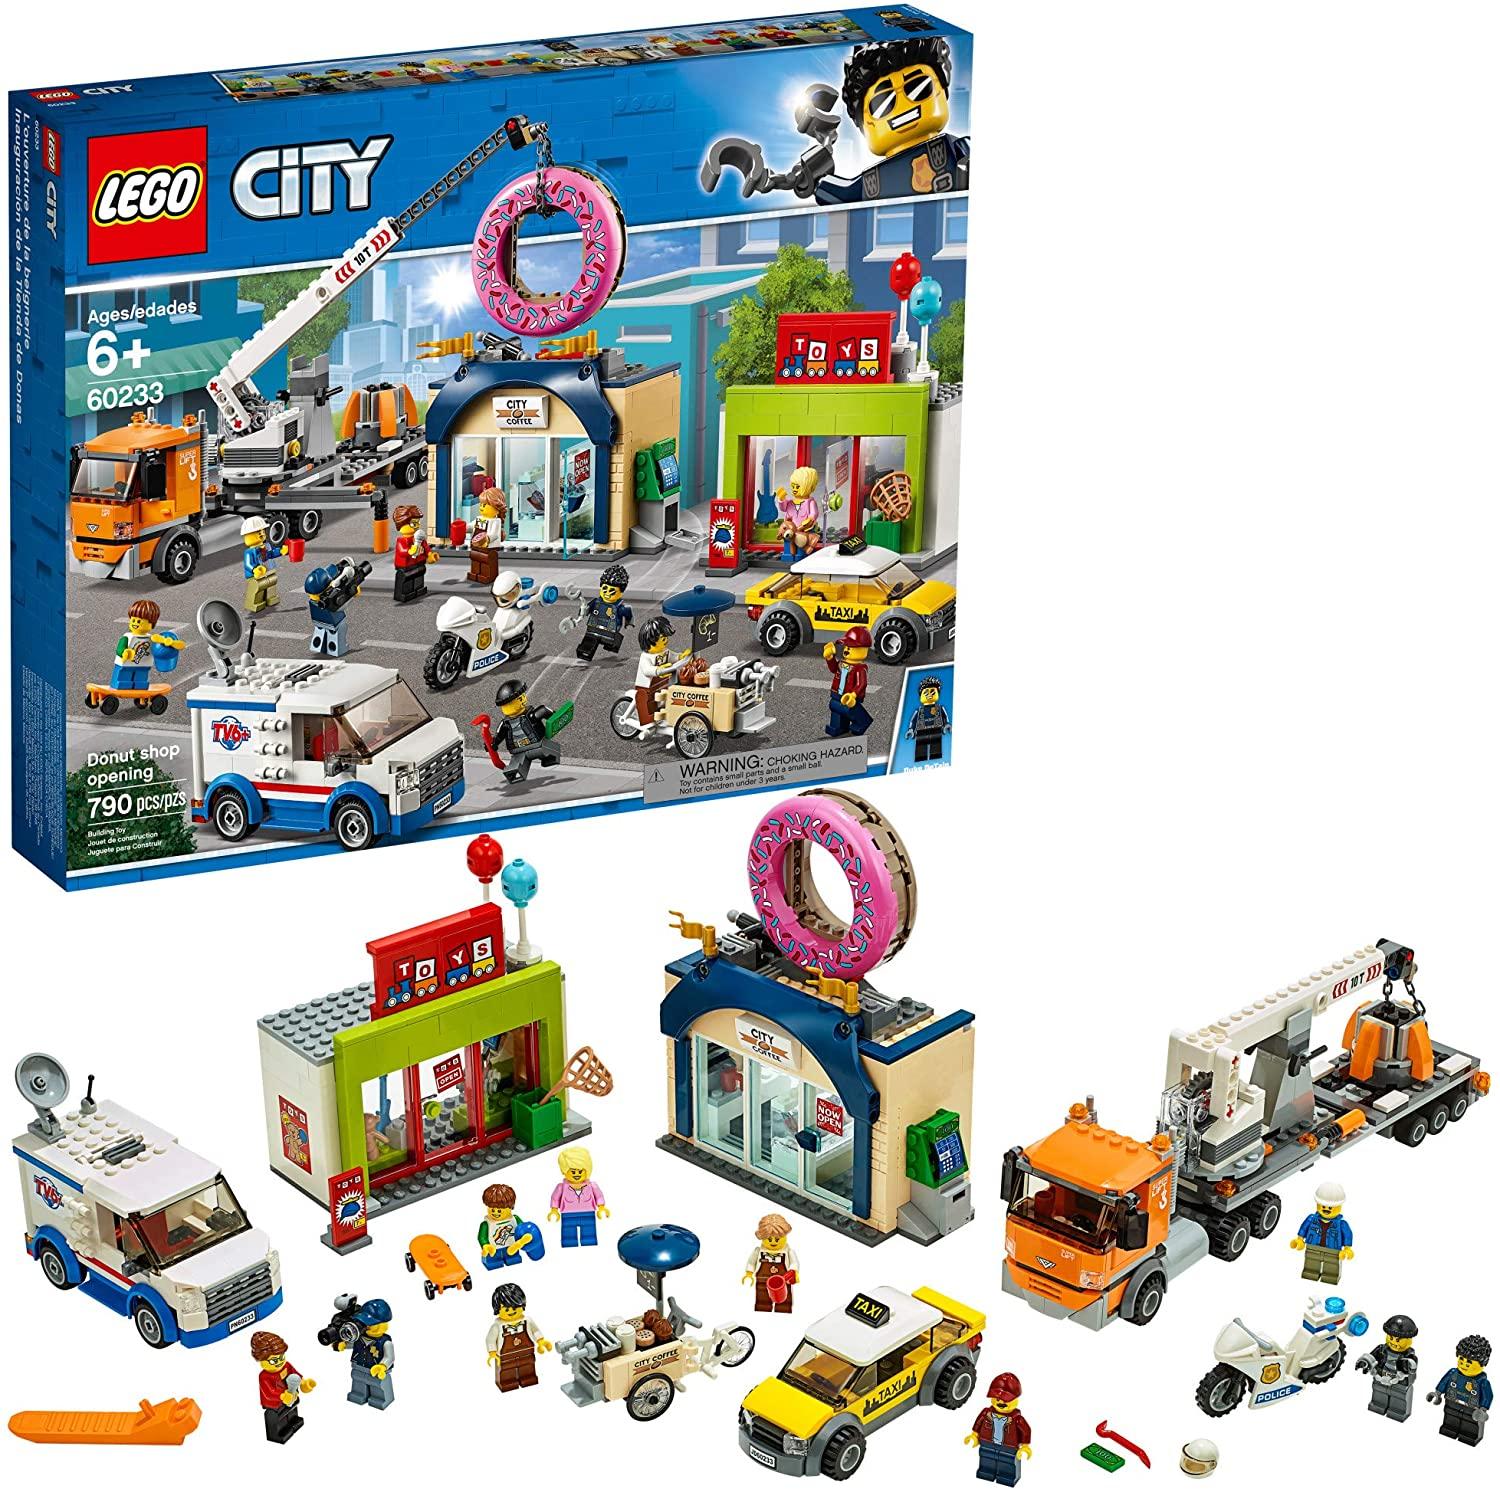 790-Piece LEGO City Donut Shop Opening 60233 for $64.79 Shipped